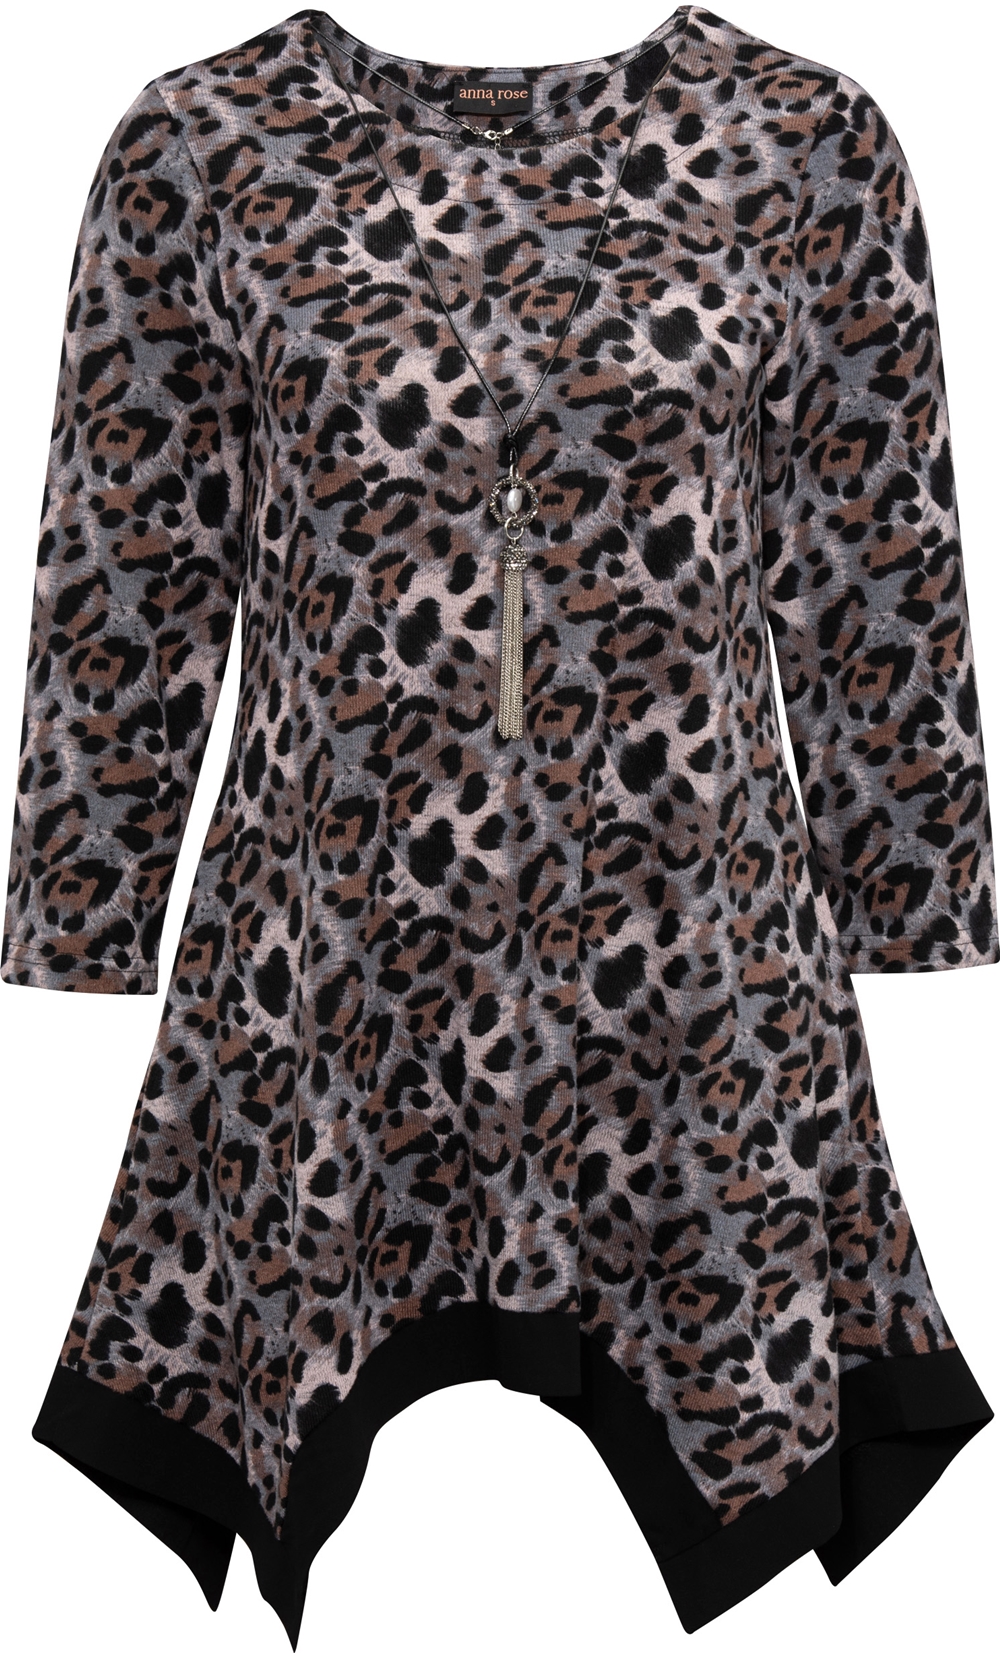 Anna Rose Animal Print Brushed Tunic With Necklace